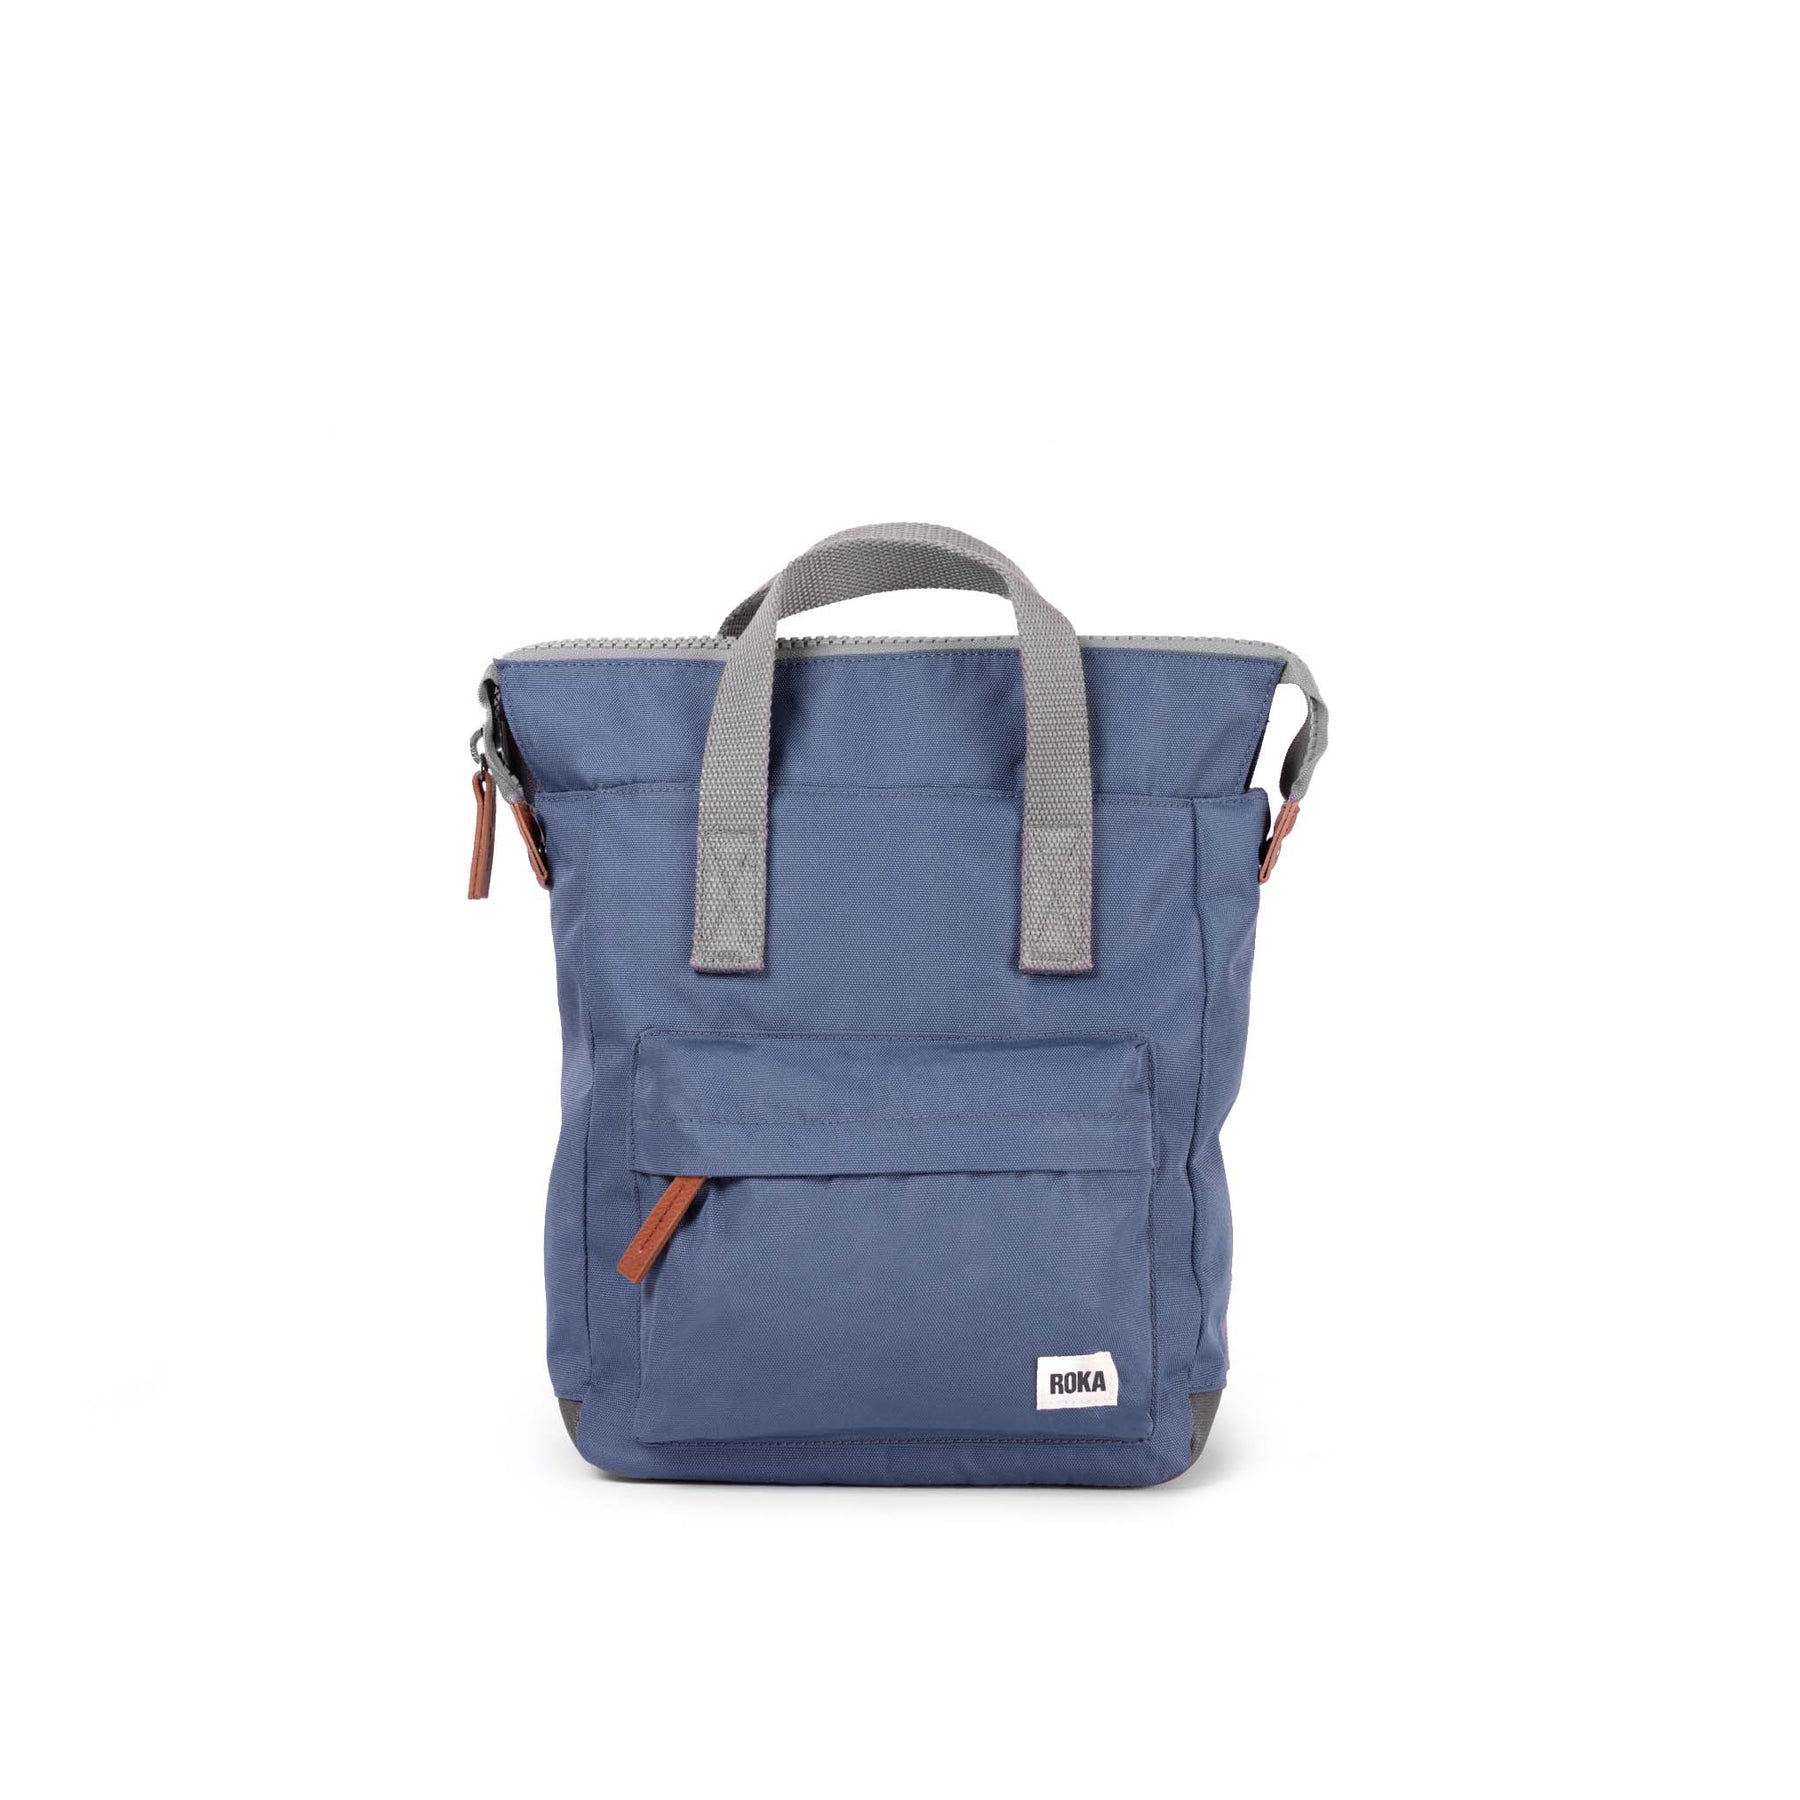 ROKA Bantry B Airforce Small Recycled Canvas Bag - OS